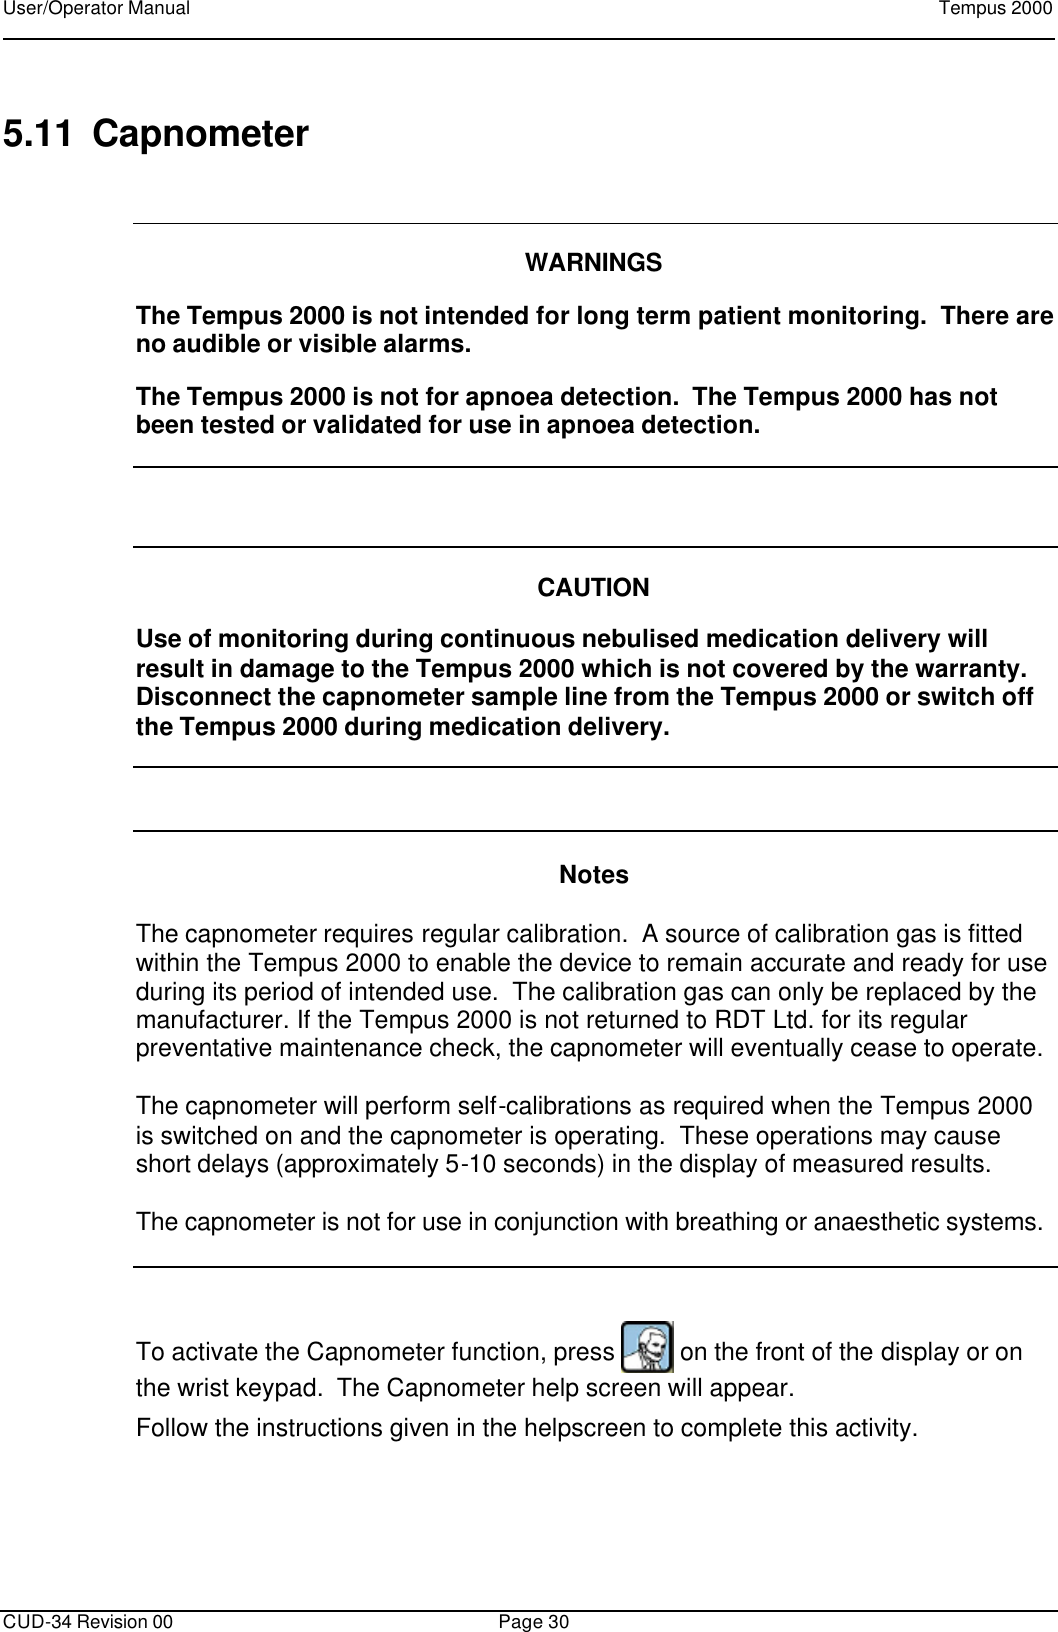 User/Operator Manual    Tempus 2000      CUD-34 Revision 00 Page 30  5.11 Capnometer    WARNINGS  The Tempus 2000 is not intended for long term patient monitoring.  There are no audible or visible alarms.  The Tempus 2000 is not for apnoea detection.  The Tempus 2000 has not been tested or validated for use in apnoea detection.     CAUTION  Use of monitoring during continuous nebulised medication delivery will result in damage to the Tempus 2000 which is not covered by the warranty.  Disconnect the capnometer sample line from the Tempus 2000 or switch off the Tempus 2000 during medication delivery.     Notes  The capnometer requires regular calibration.  A source of calibration gas is fitted within the Tempus 2000 to enable the device to remain accurate and ready for use during its period of intended use.  The calibration gas can only be replaced by the manufacturer. If the Tempus 2000 is not returned to RDT Ltd. for its regular preventative maintenance check, the capnometer will eventually cease to operate.  The capnometer will perform self-calibrations as required when the Tempus 2000 is switched on and the capnometer is operating.  These operations may cause short delays (approximately 5-10 seconds) in the display of measured results.  The capnometer is not for use in conjunction with breathing or anaesthetic systems.   To activate the Capnometer function, press   on the front of the display or on the wrist keypad.  The Capnometer help screen will appear. Follow the instructions given in the helpscreen to complete this activity.  